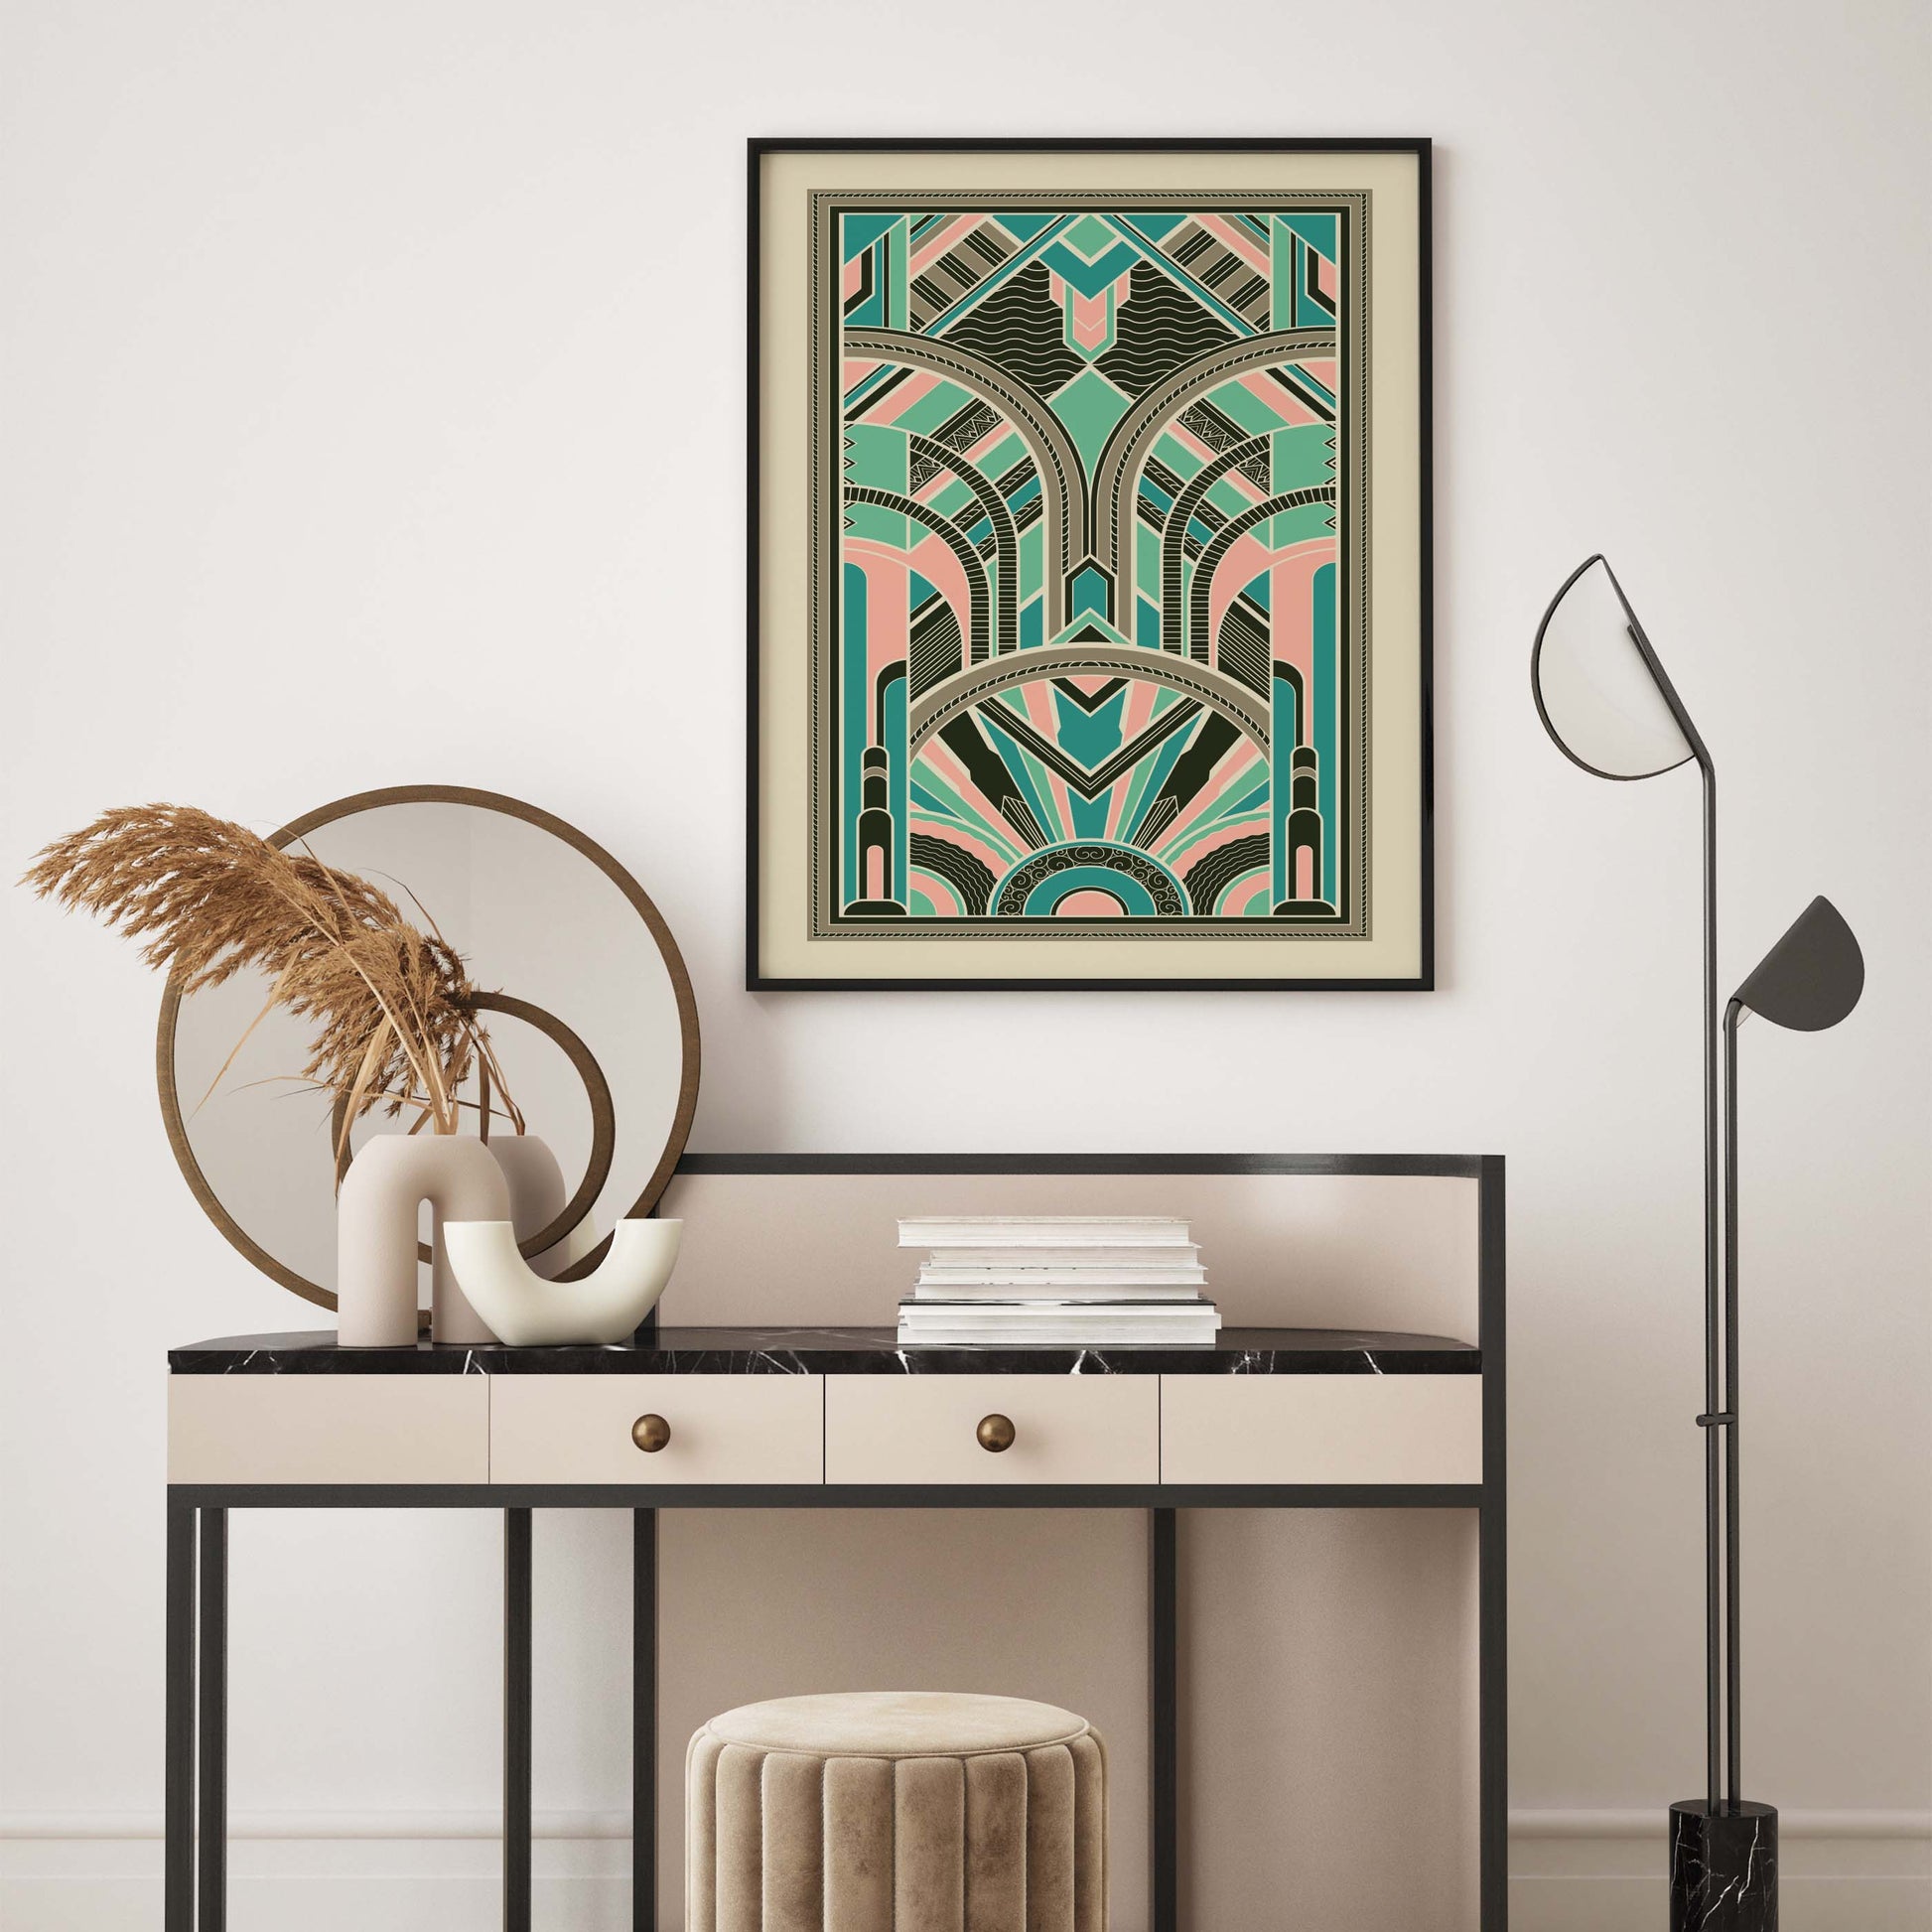 Art deco wall art print with symmetrical pattern in pink and teal